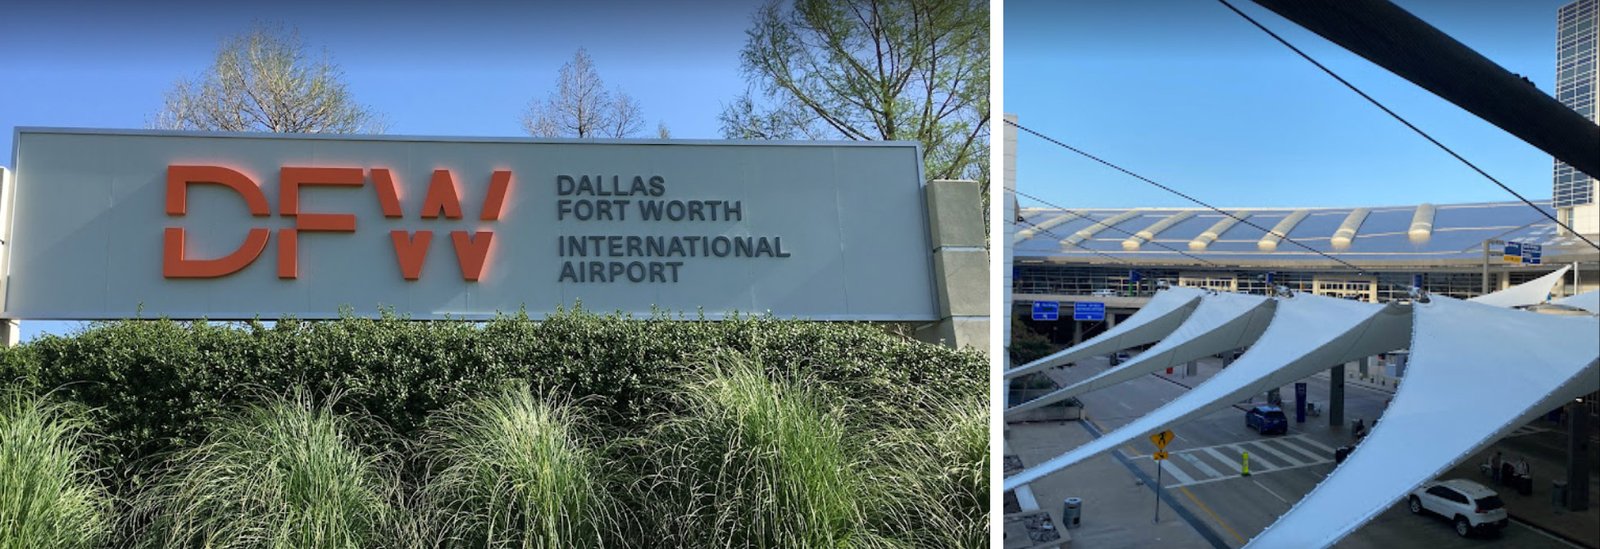 The main airport in Dallas and Fort Worth